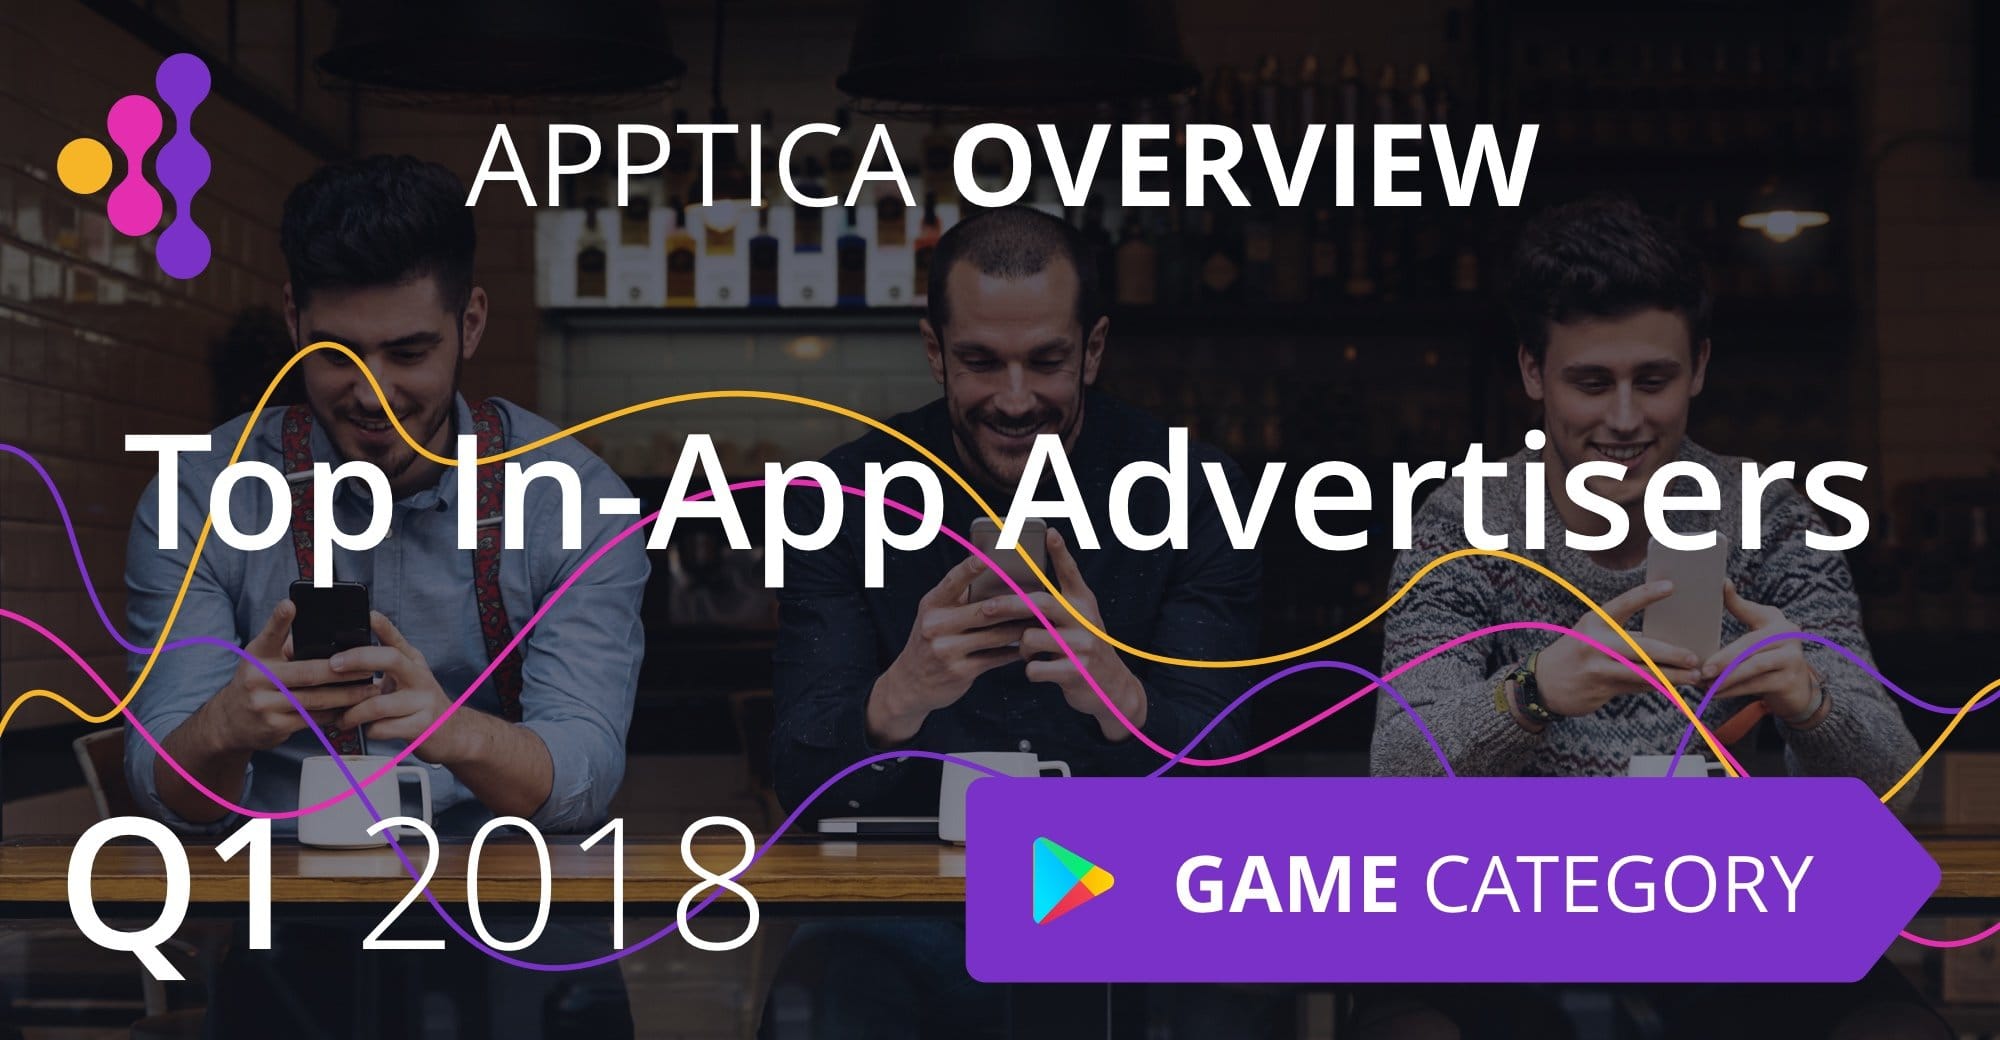 Top In-App Advertisers of Q1 2018, Android, Game Category. Apptica Overview.